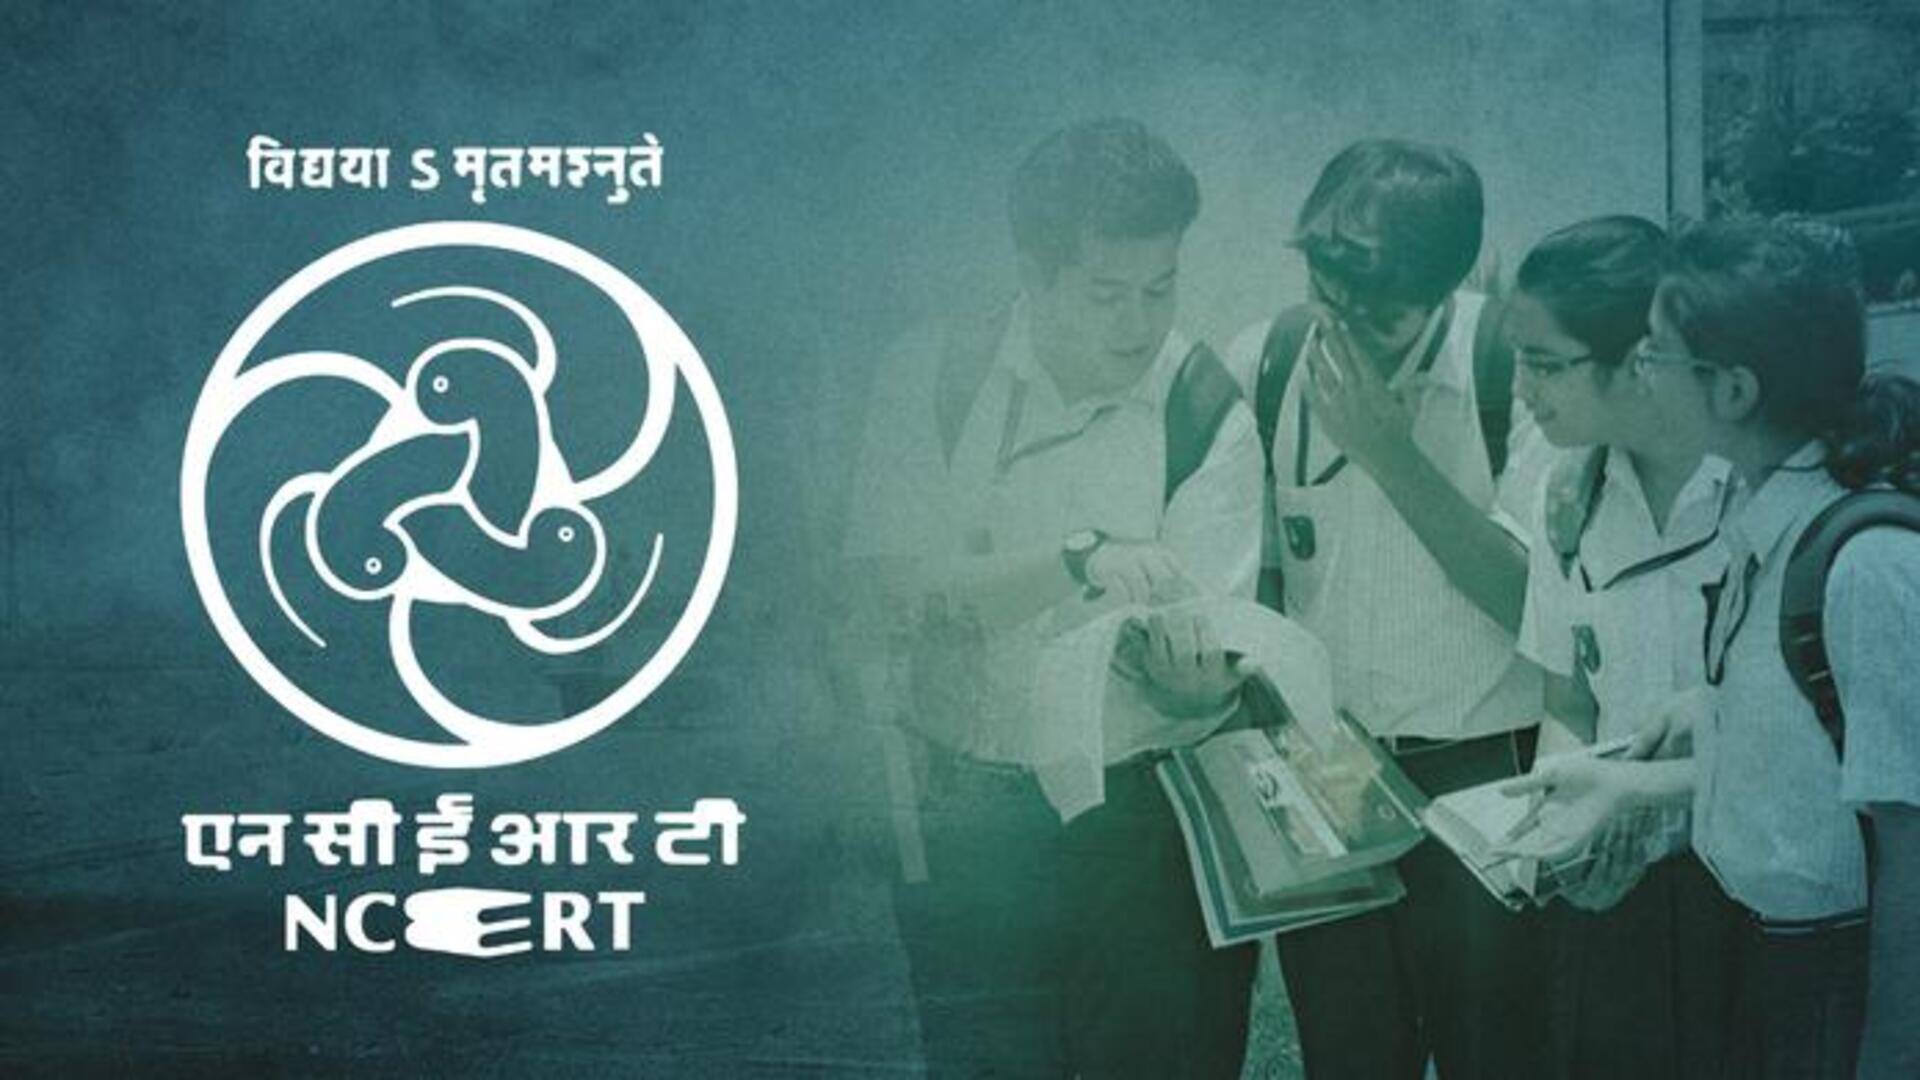 NCERT forms 35-member panel for social science syllabus development